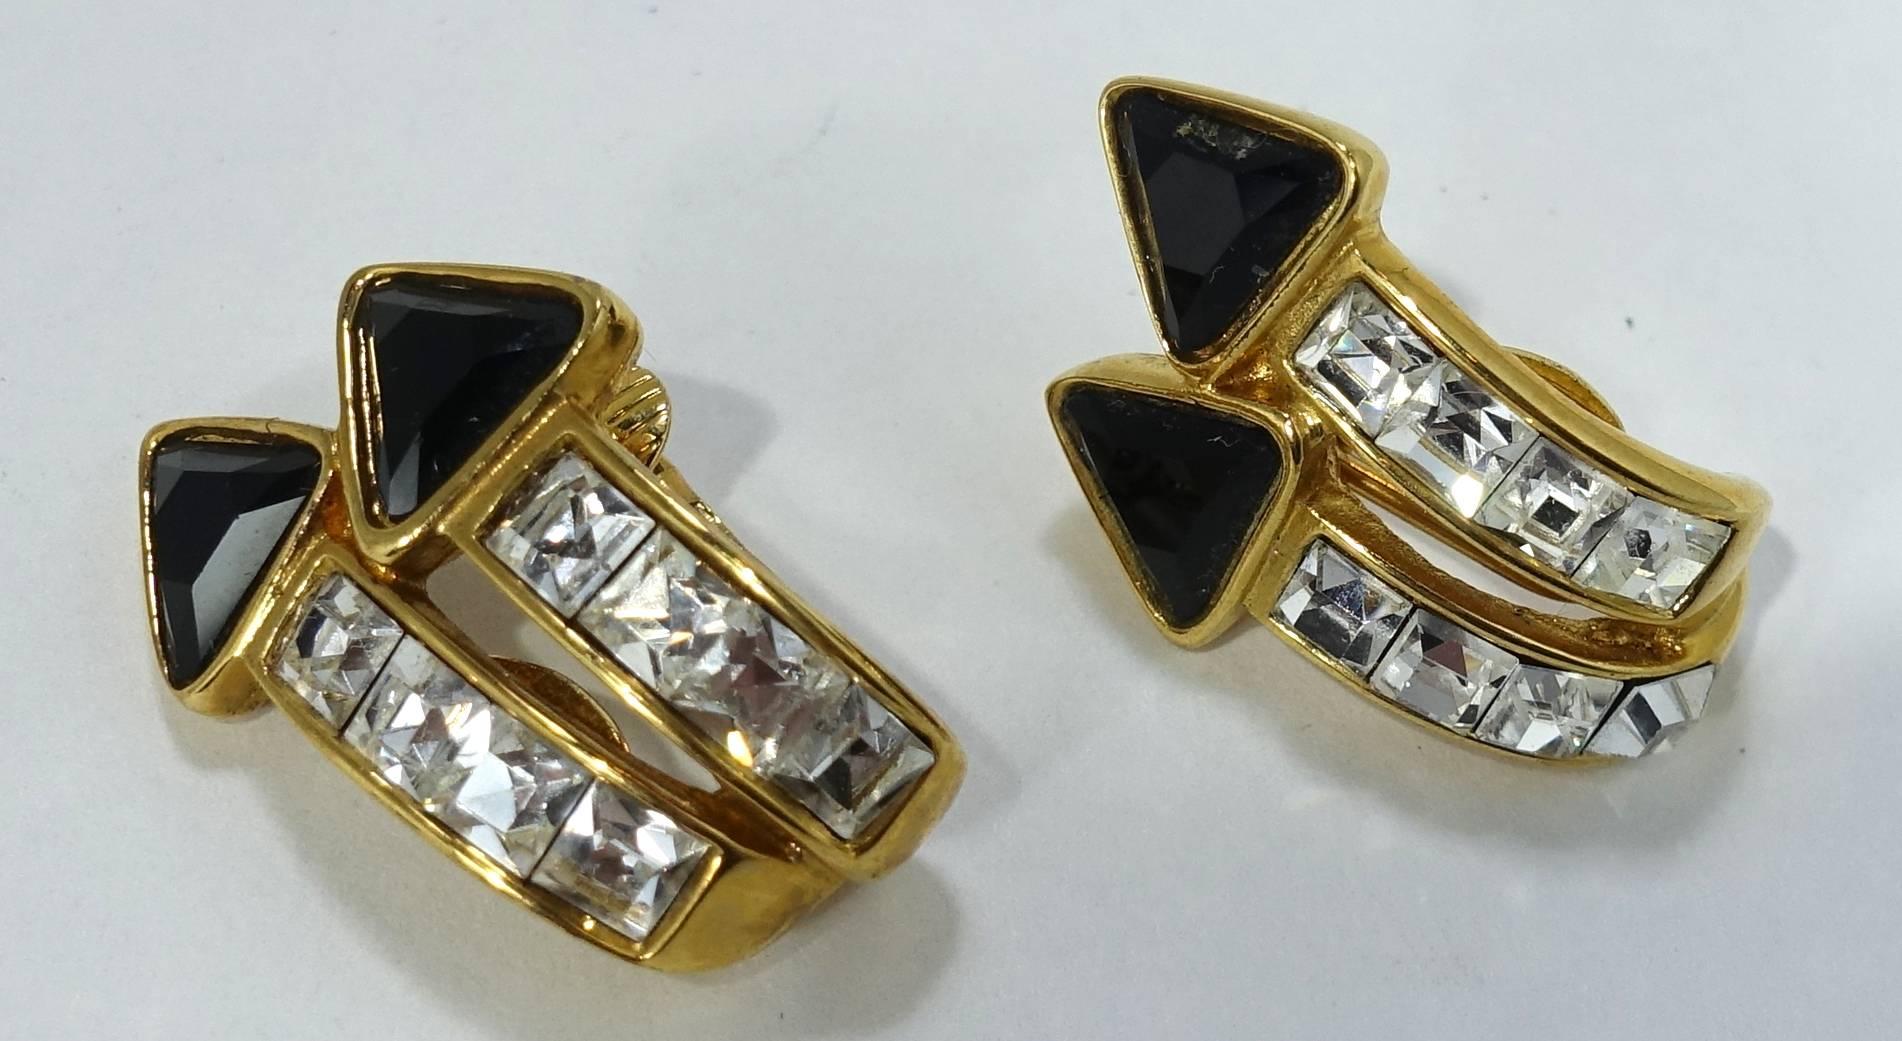 These Kenneth Jay Lane earrings are designed with two arrows pointing upward.  They have black and clear rhinestones in a goldtone setting.  These clip earrings measure 1-1/4” x 3/4” and are signed “Kenneth Lane”. They are in excellent condition.